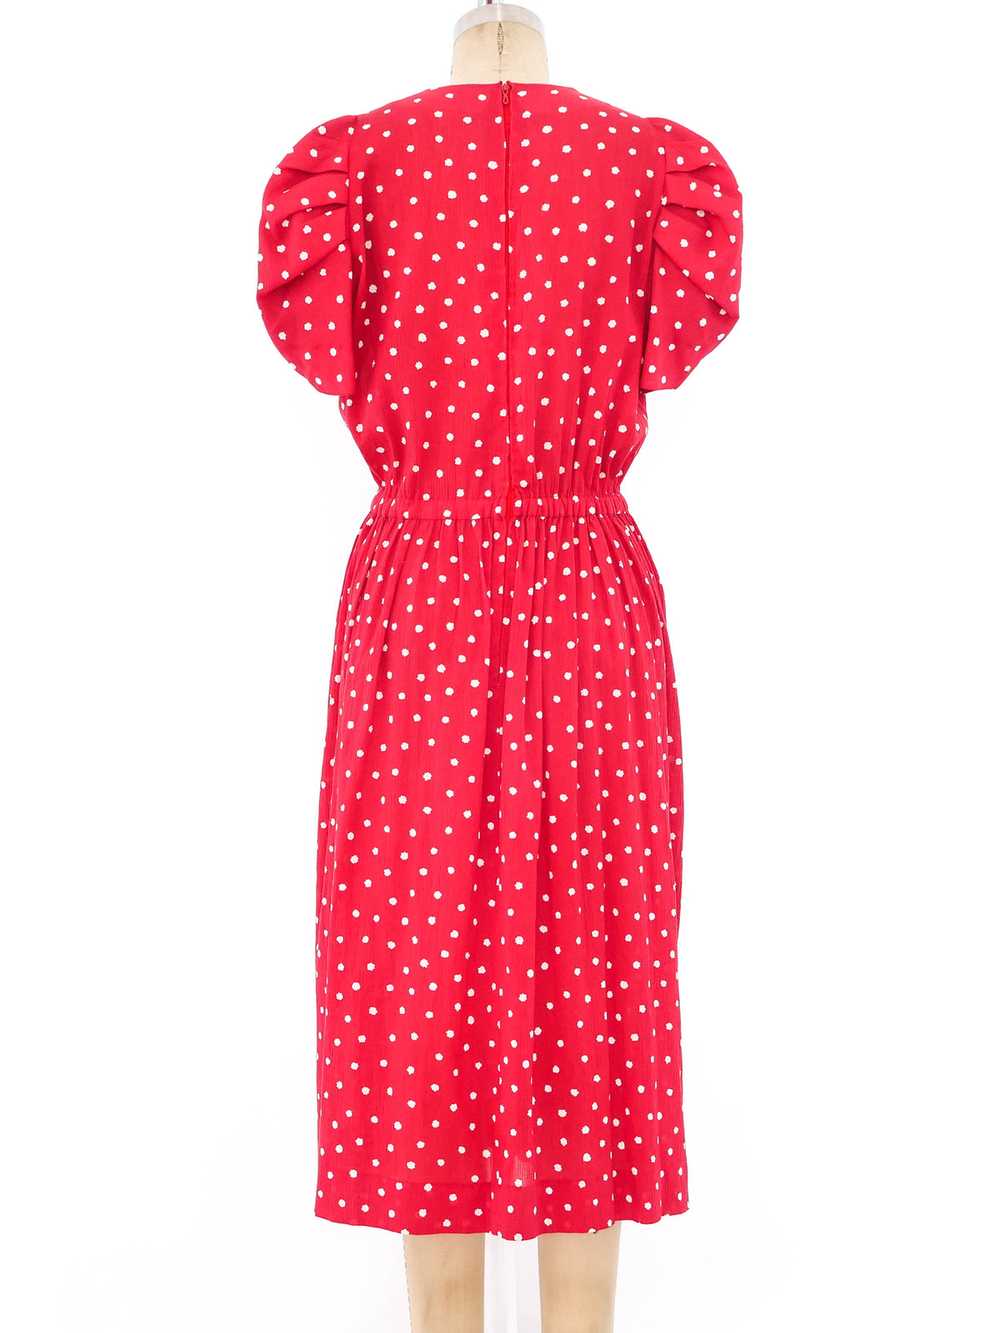 Jean Patou Dotted Red Dress - image 6